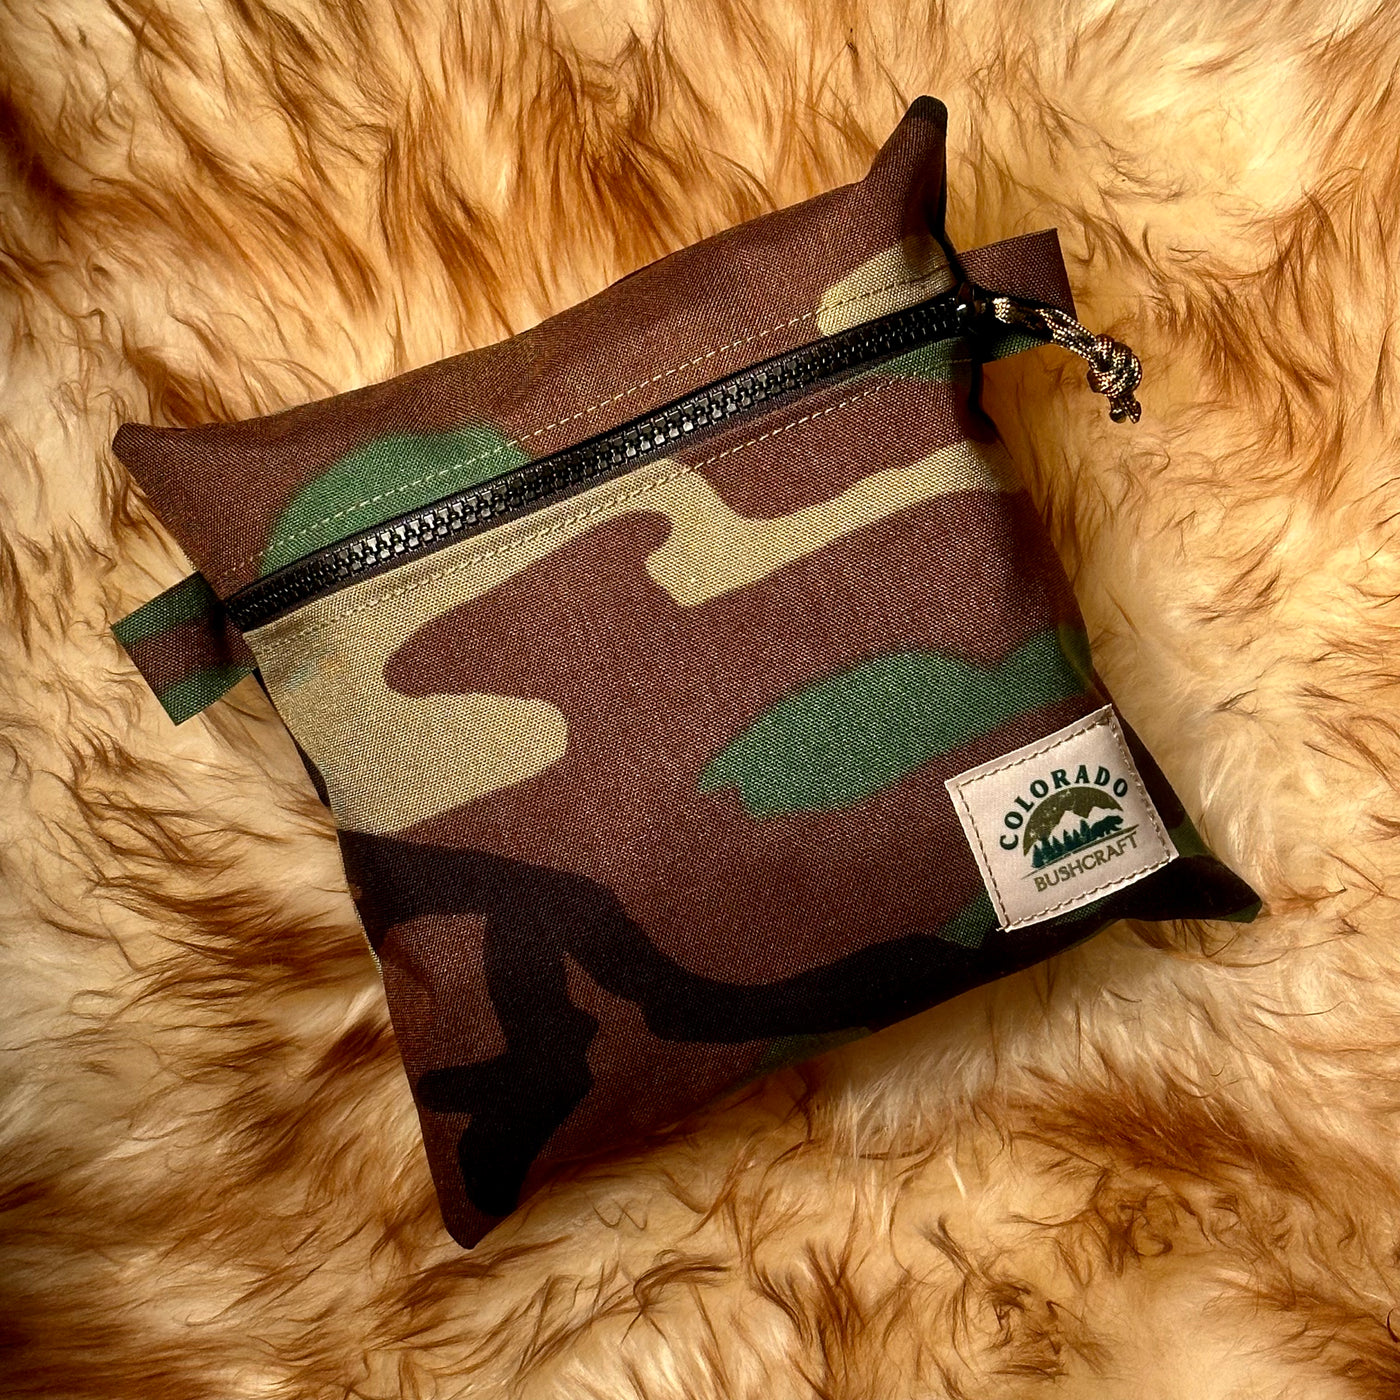 USA Made Cordura 1000D Woodland Camo Medium Traditional EDC Pouch Bushcraft Survival Camping Possibles Dopp Grooming